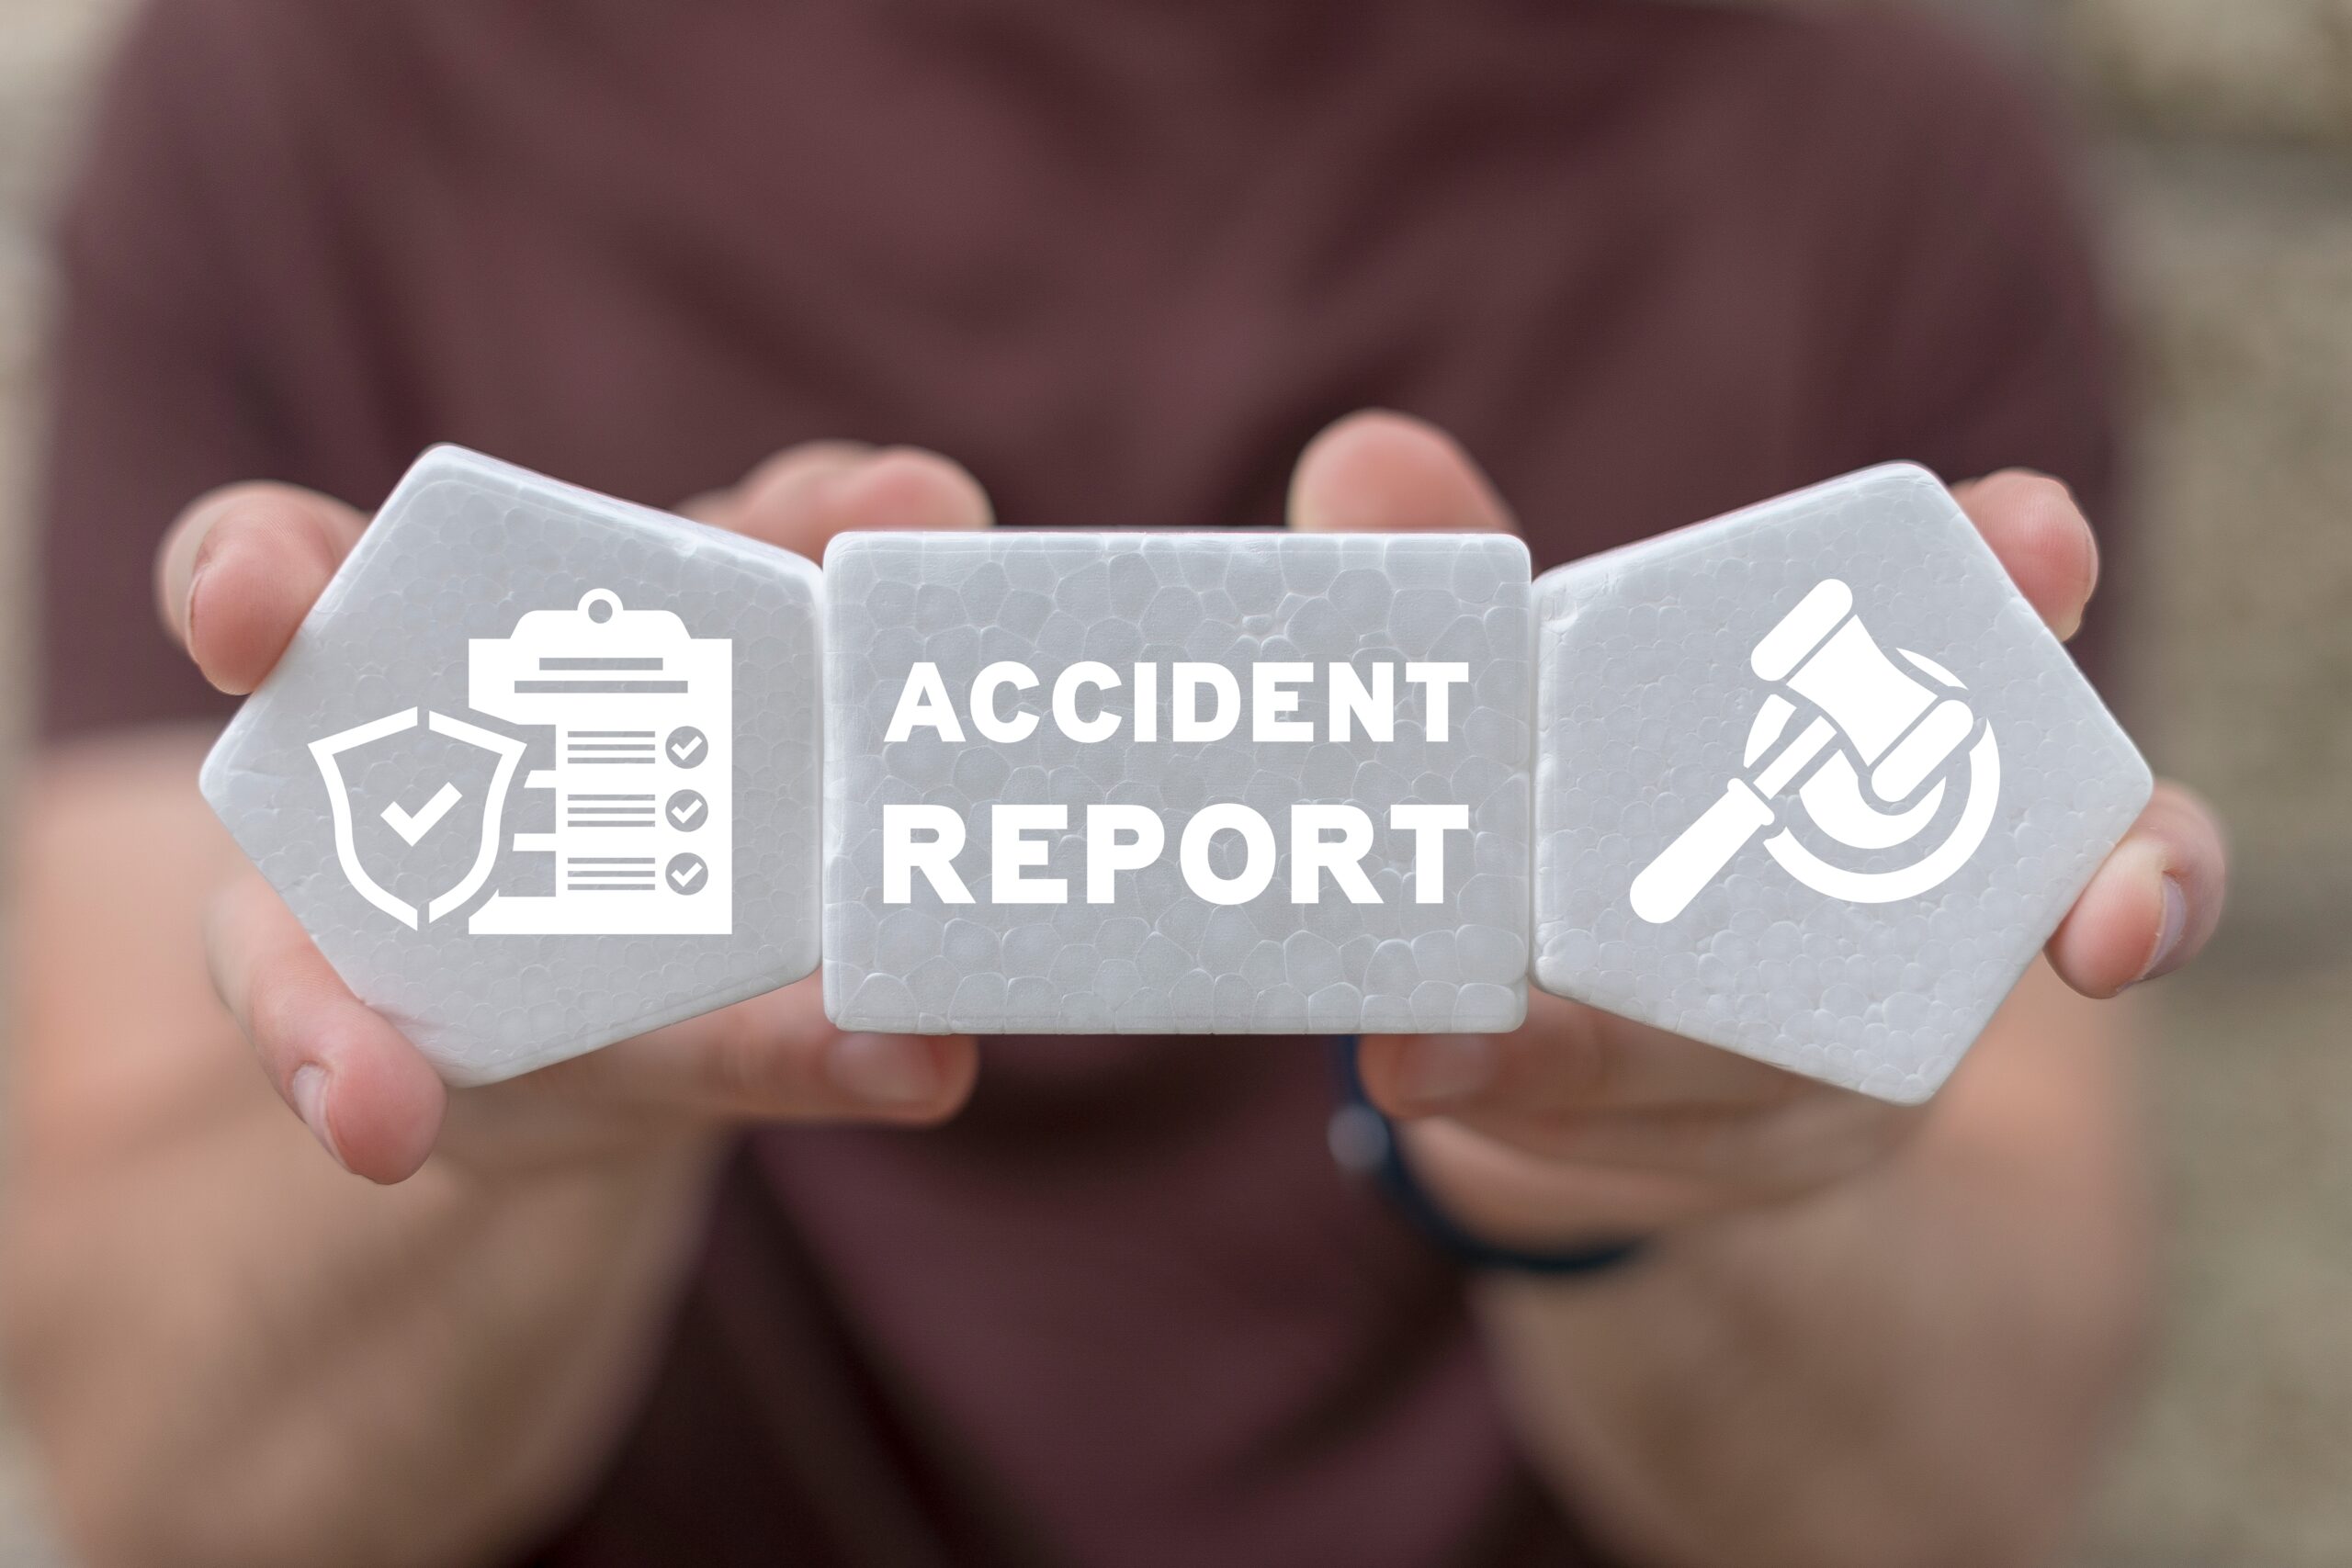 man holding plastic blocks with accident report text written on them